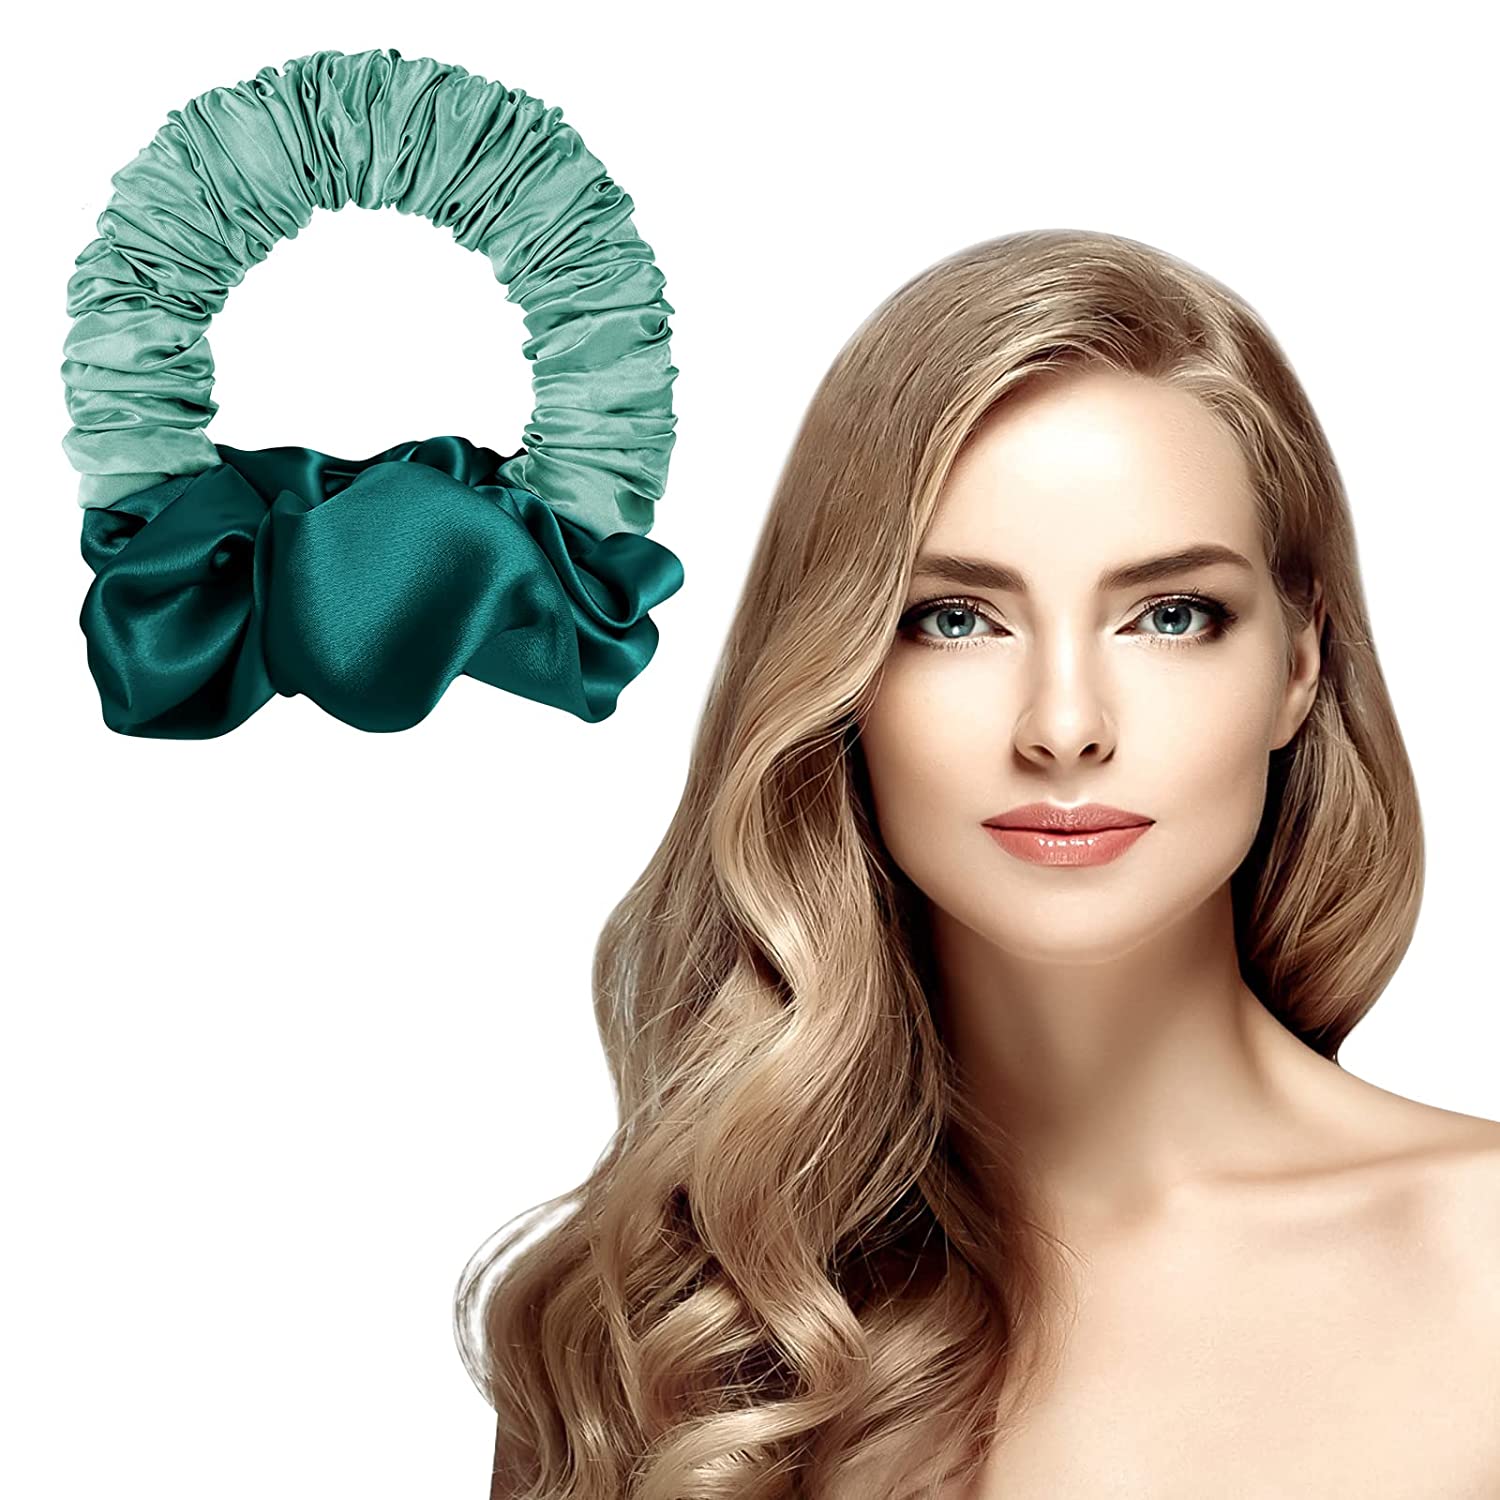 URAQT Heatless Curling Hairband, Soft No Heat Ponytail Hairband Curlers, 2022 Scrunchie Rollers, Magic Hairdresser Tools for Long Hair, DIY Styling (Green), ‎green